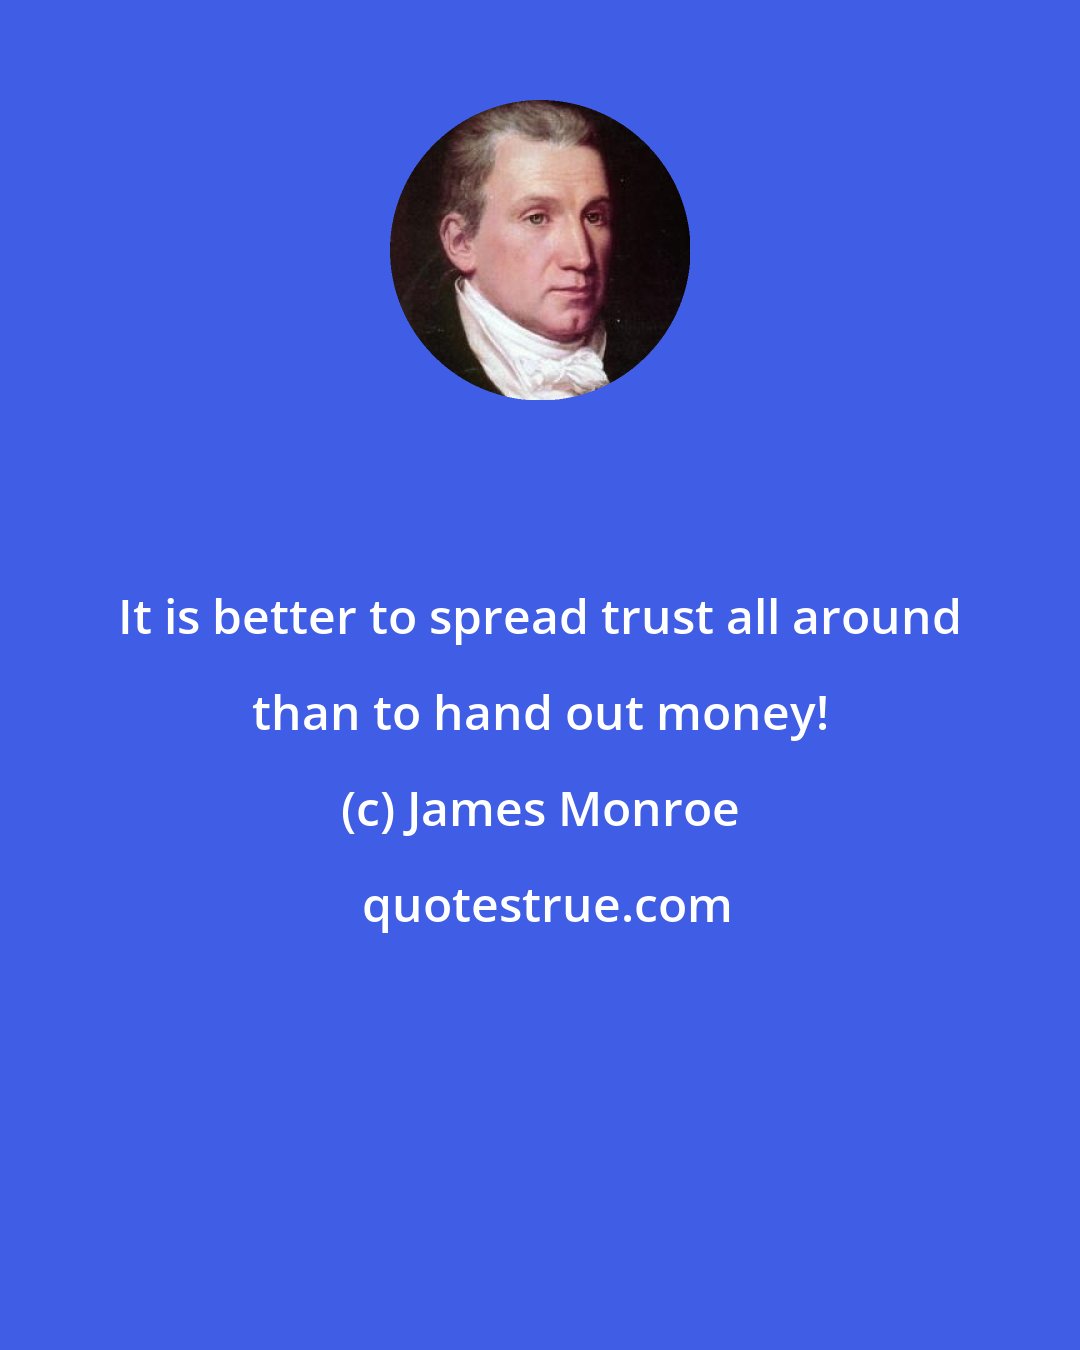 James Monroe: It is better to spread trust all around than to hand out money!